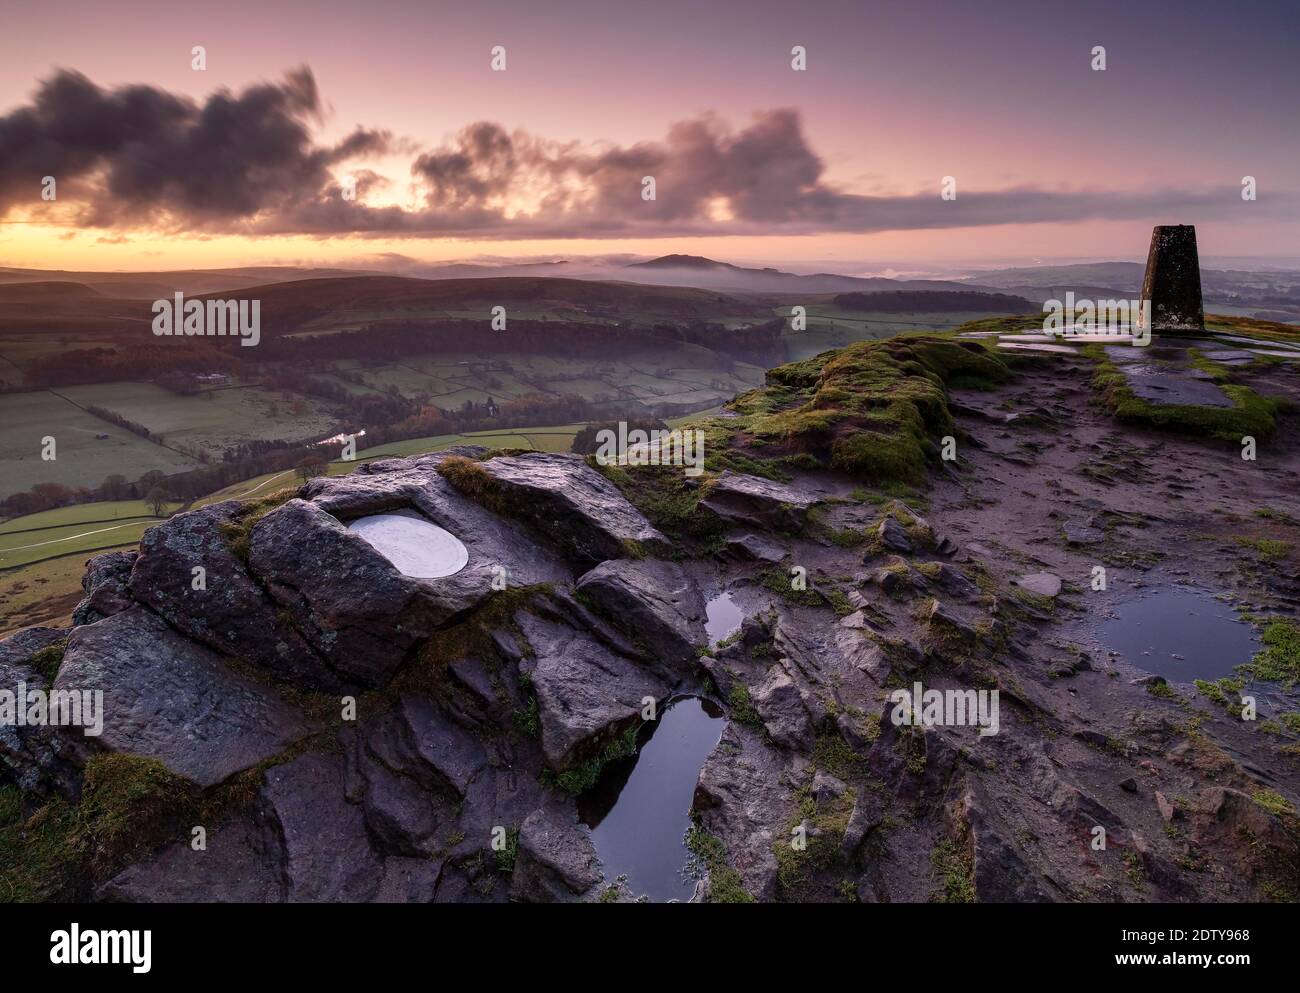 Dawn from the peak of Shutlingsloe over Wildboarclough, near Macclesfield, Cheshire, Peak District National Park, England, UK Stock Photo